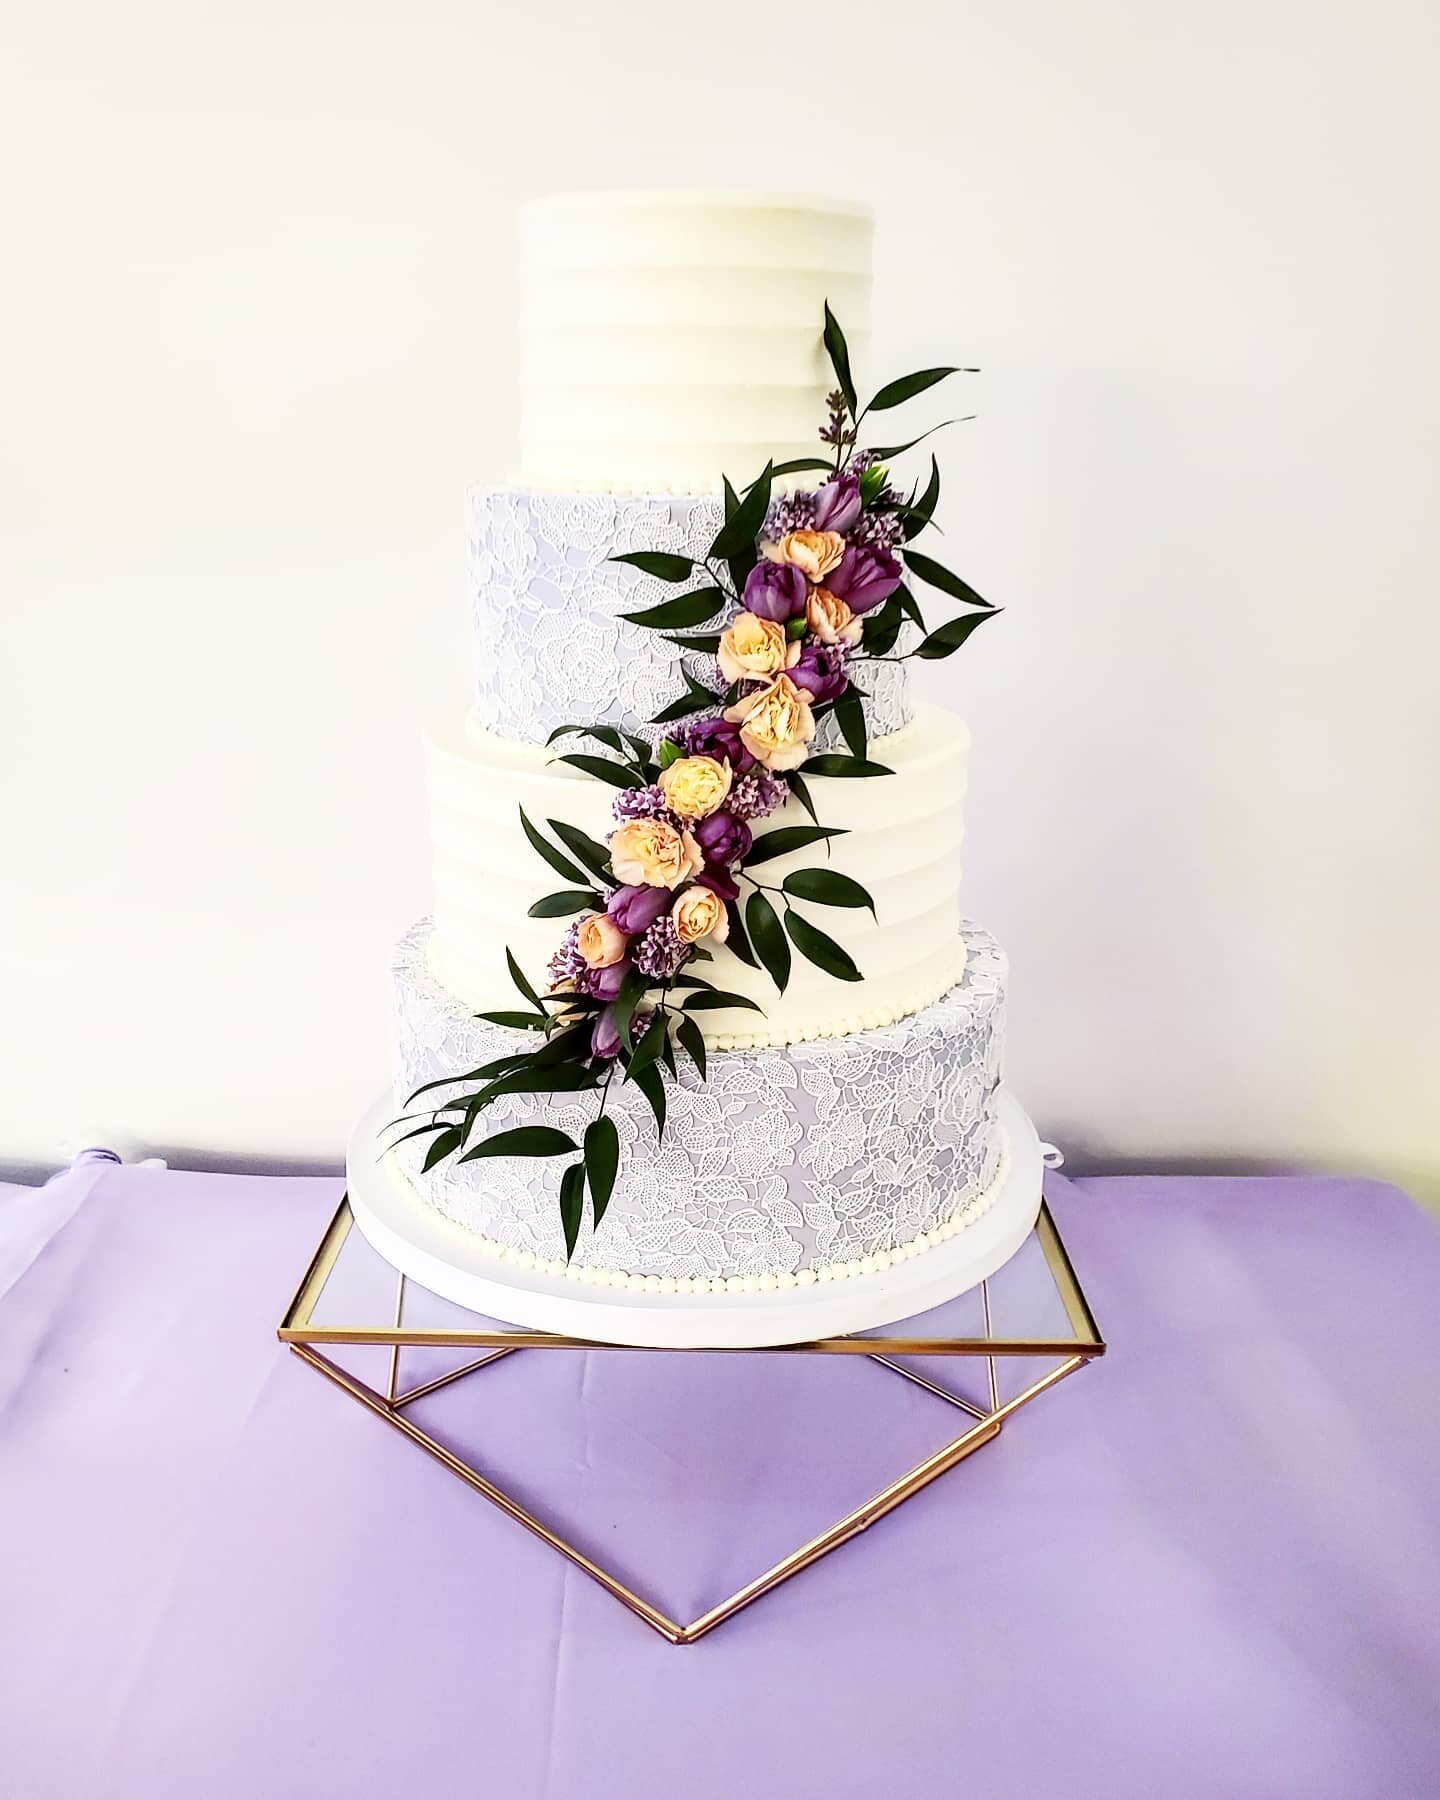 We got this new BEAUTIFUL stand! How do you feel about the gold geometric? #cakelace #sugarveil #purplecake #purplewedding #purpleweddingcake #💜 #cake #cakes #wedding #weddingcake #weddingcakes #weddings #weddingcakeflowers #uniquecakes #uniquecake 